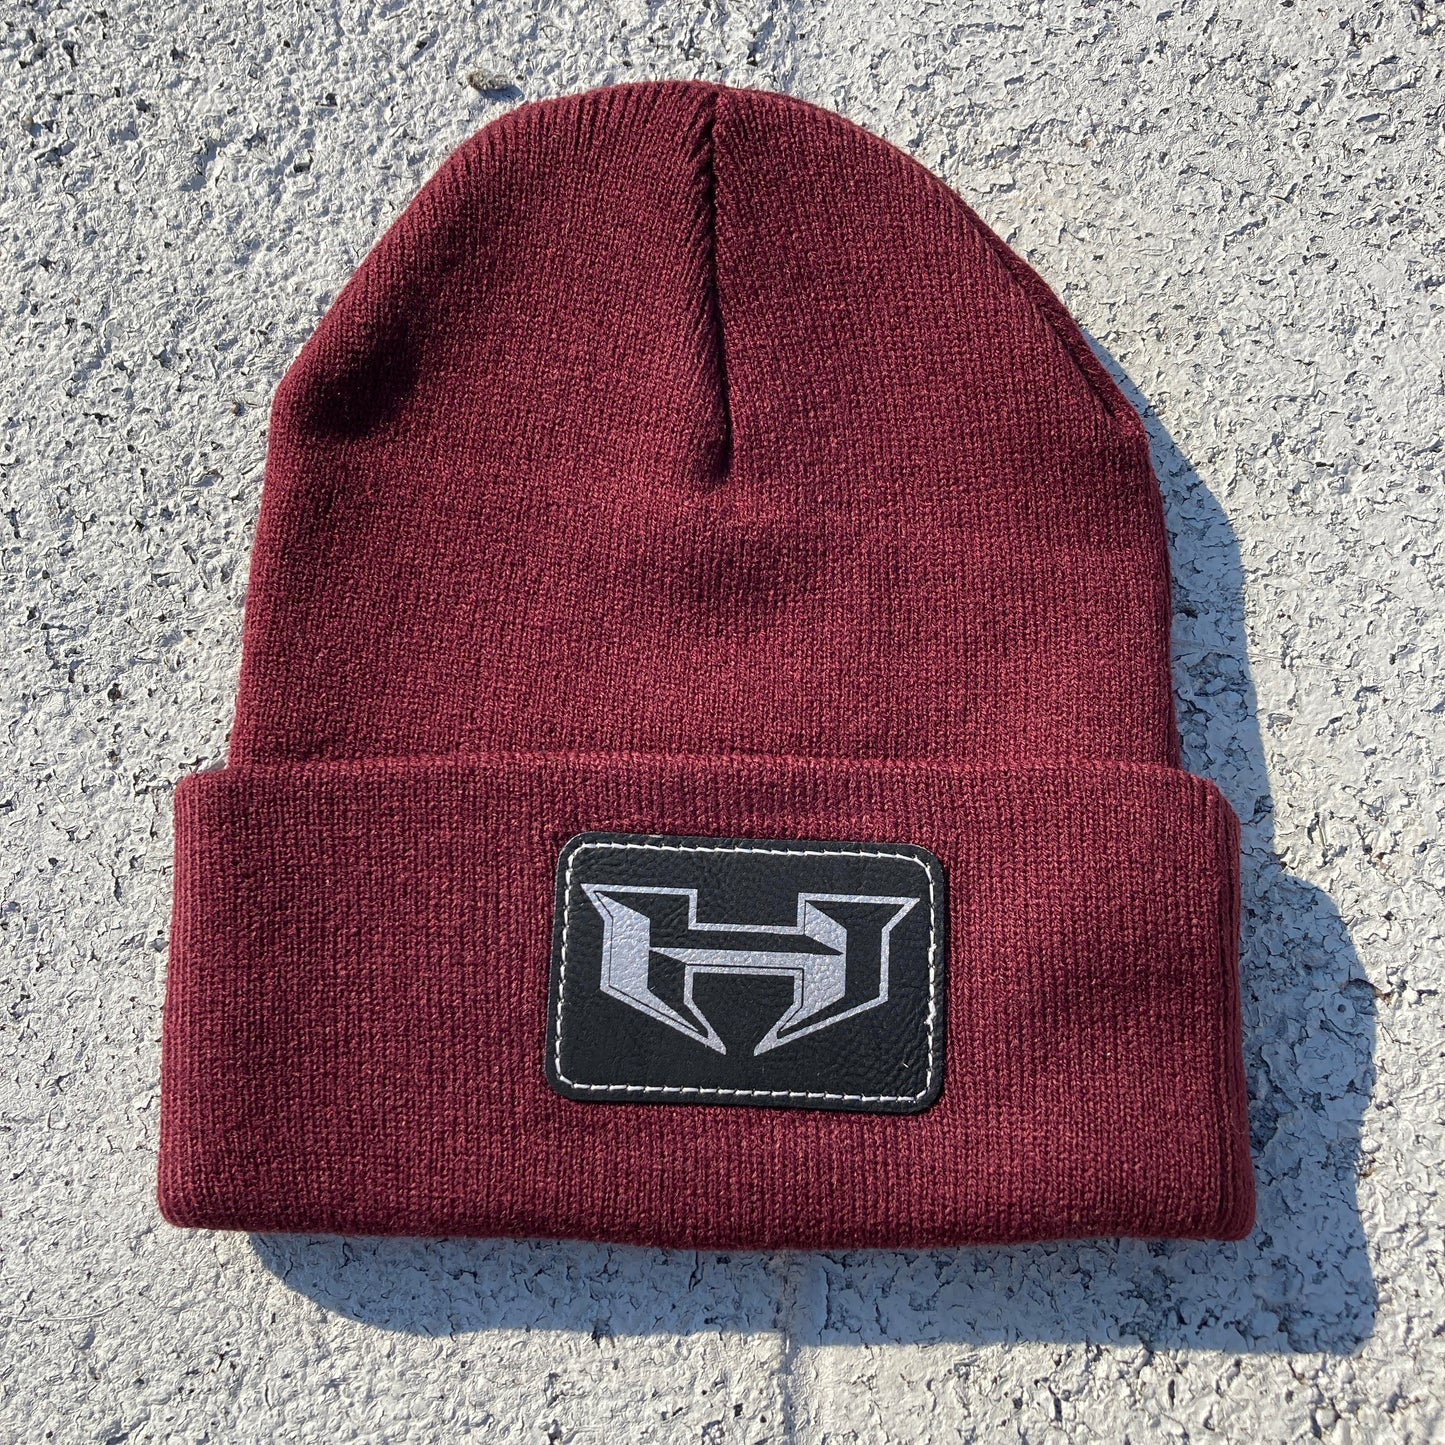 Maroon Beanie with Heard "H" Patch